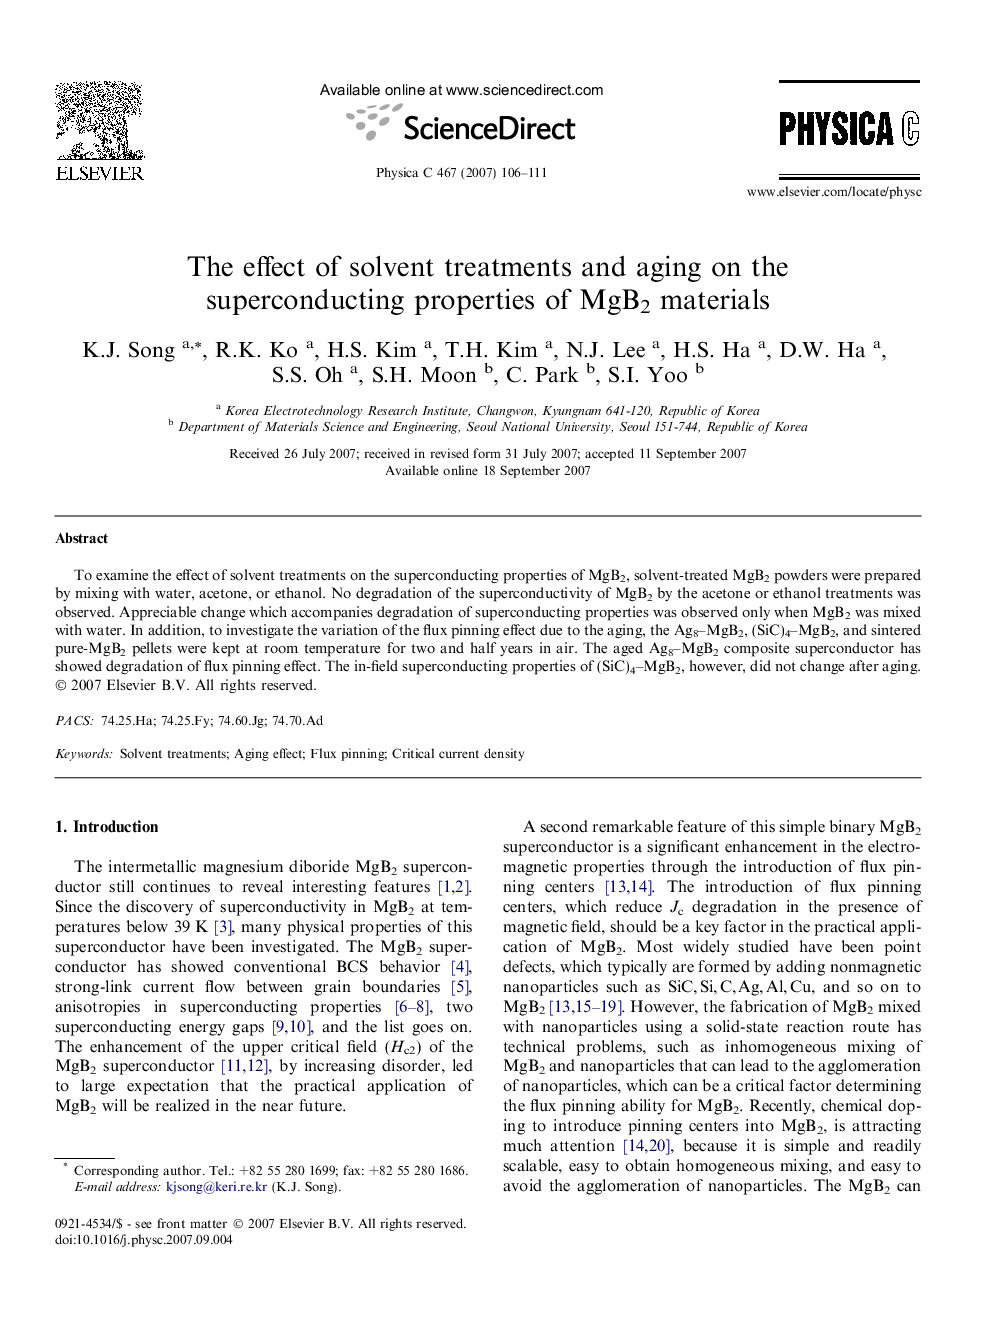 The effect of solvent treatments and aging on the superconducting properties of MgB2 materials